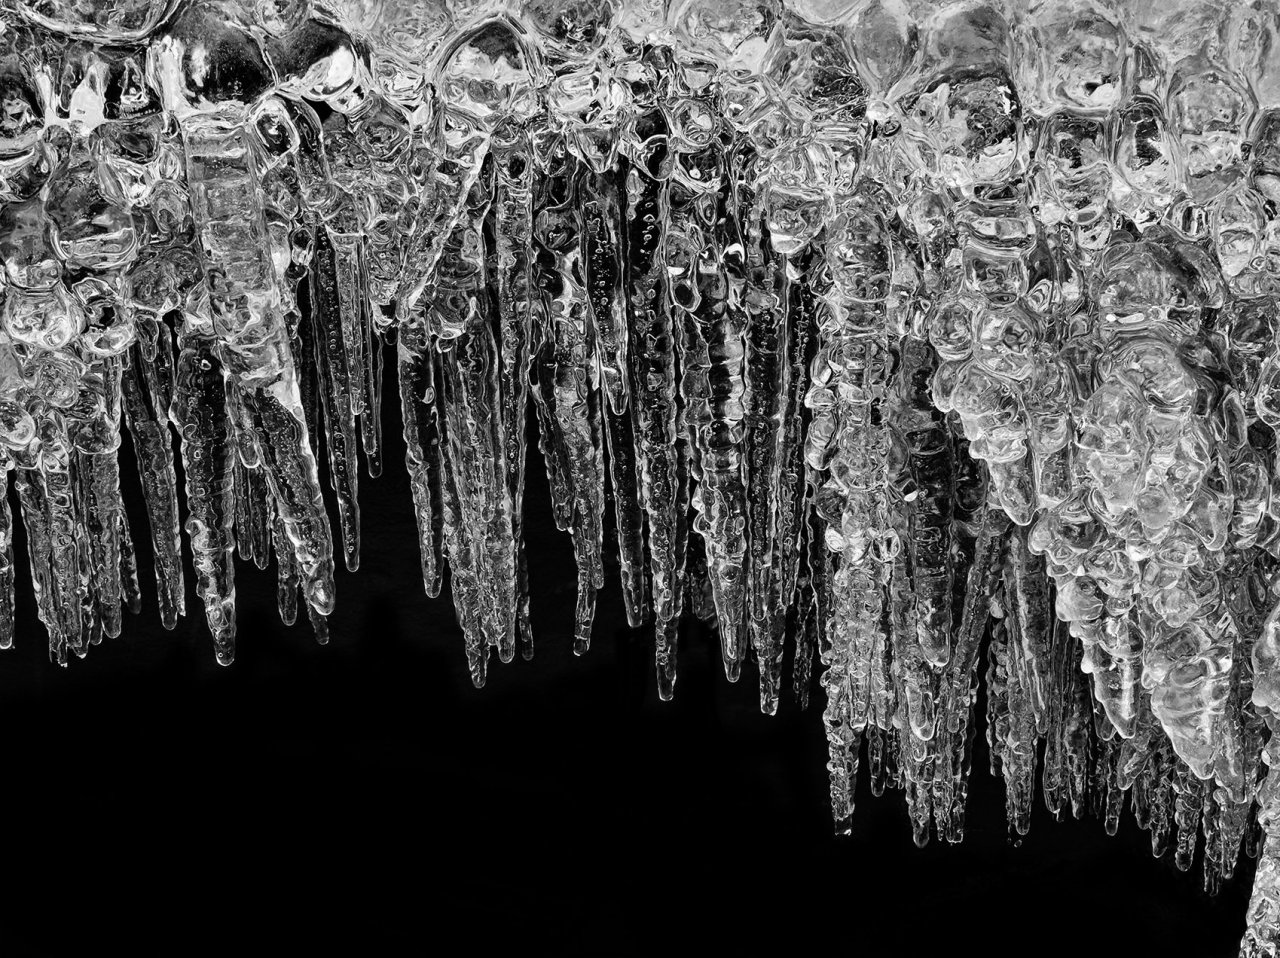 Icicles Jigsaw Puzzle Online Jigsaw Puzzle